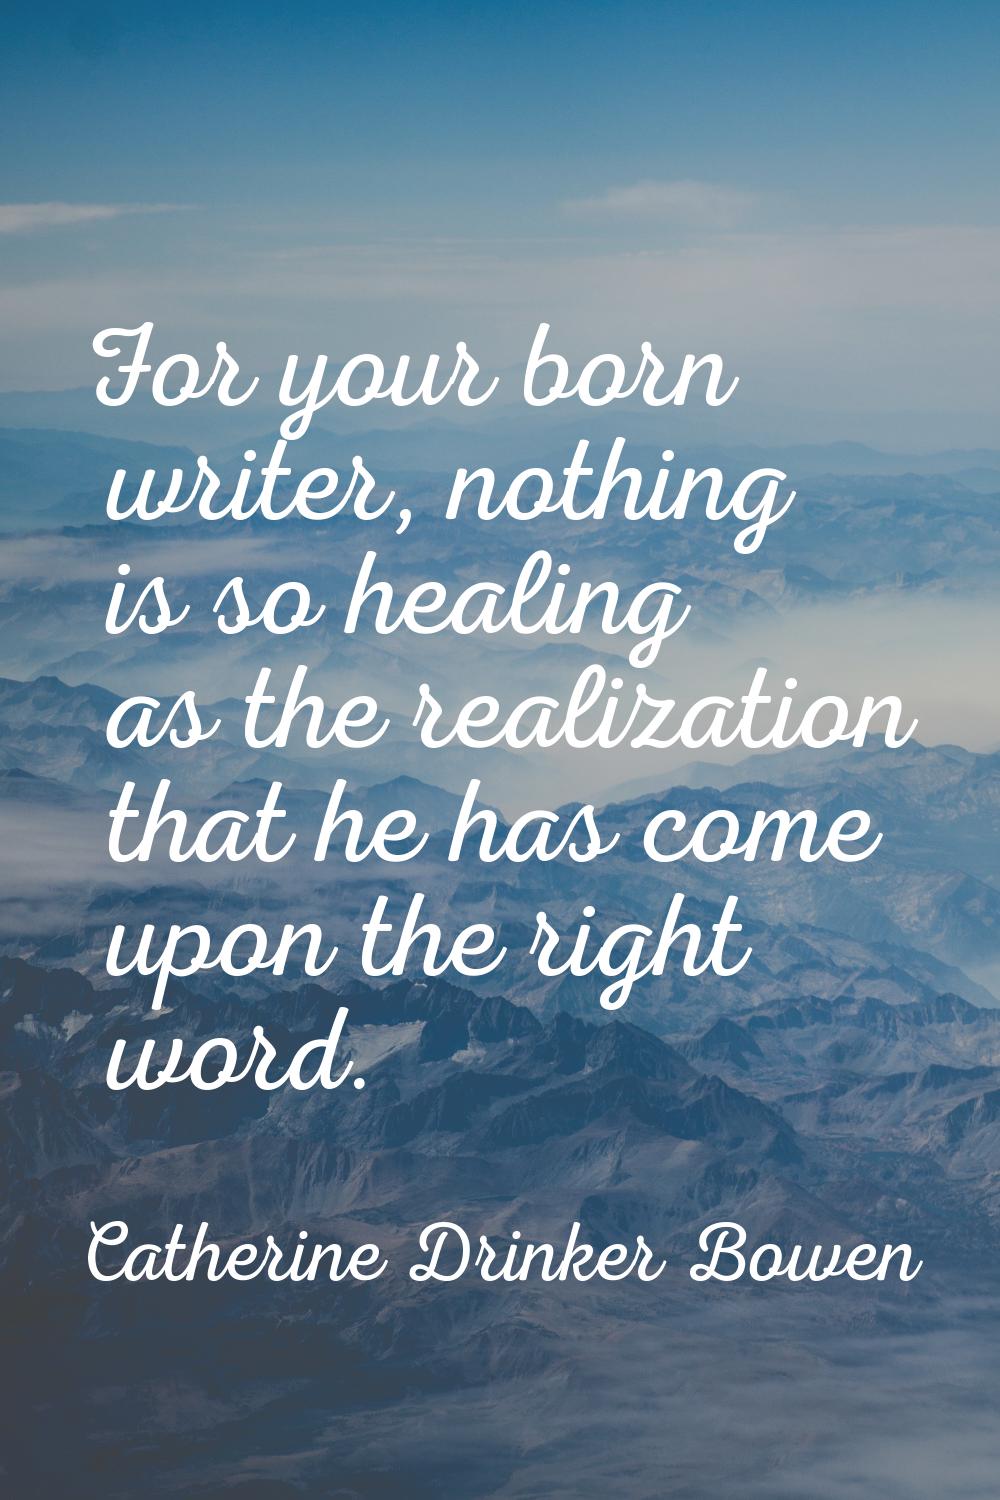 For your born writer, nothing is so healing as the realization that he has come upon the right word